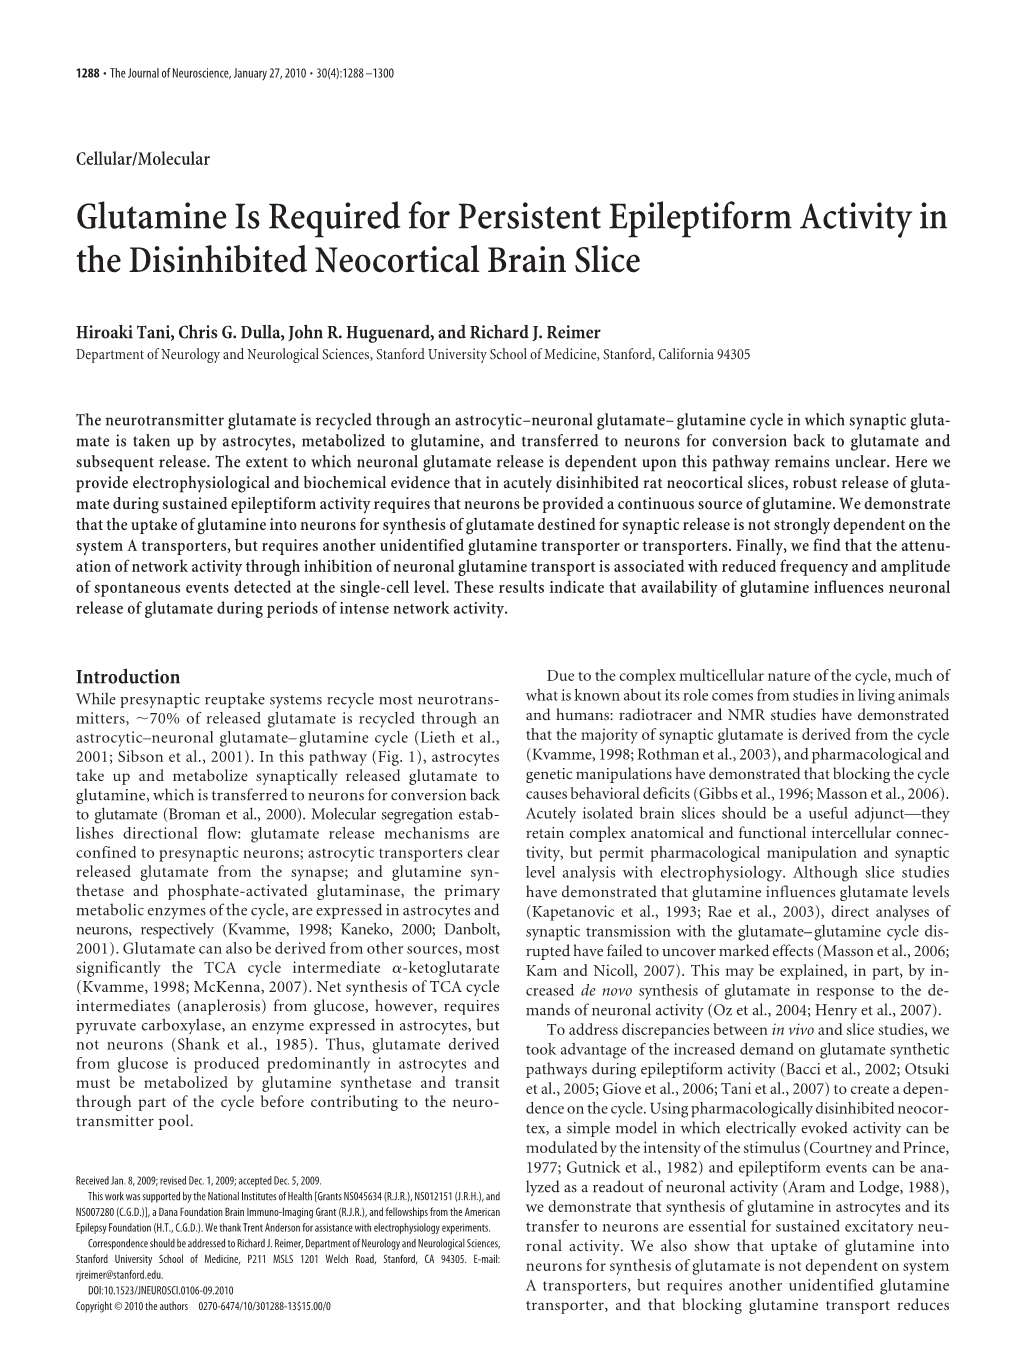 Glutamine Is Required for Persistent Epileptiform Activity in the Disinhibited Neocortical Brain Slice